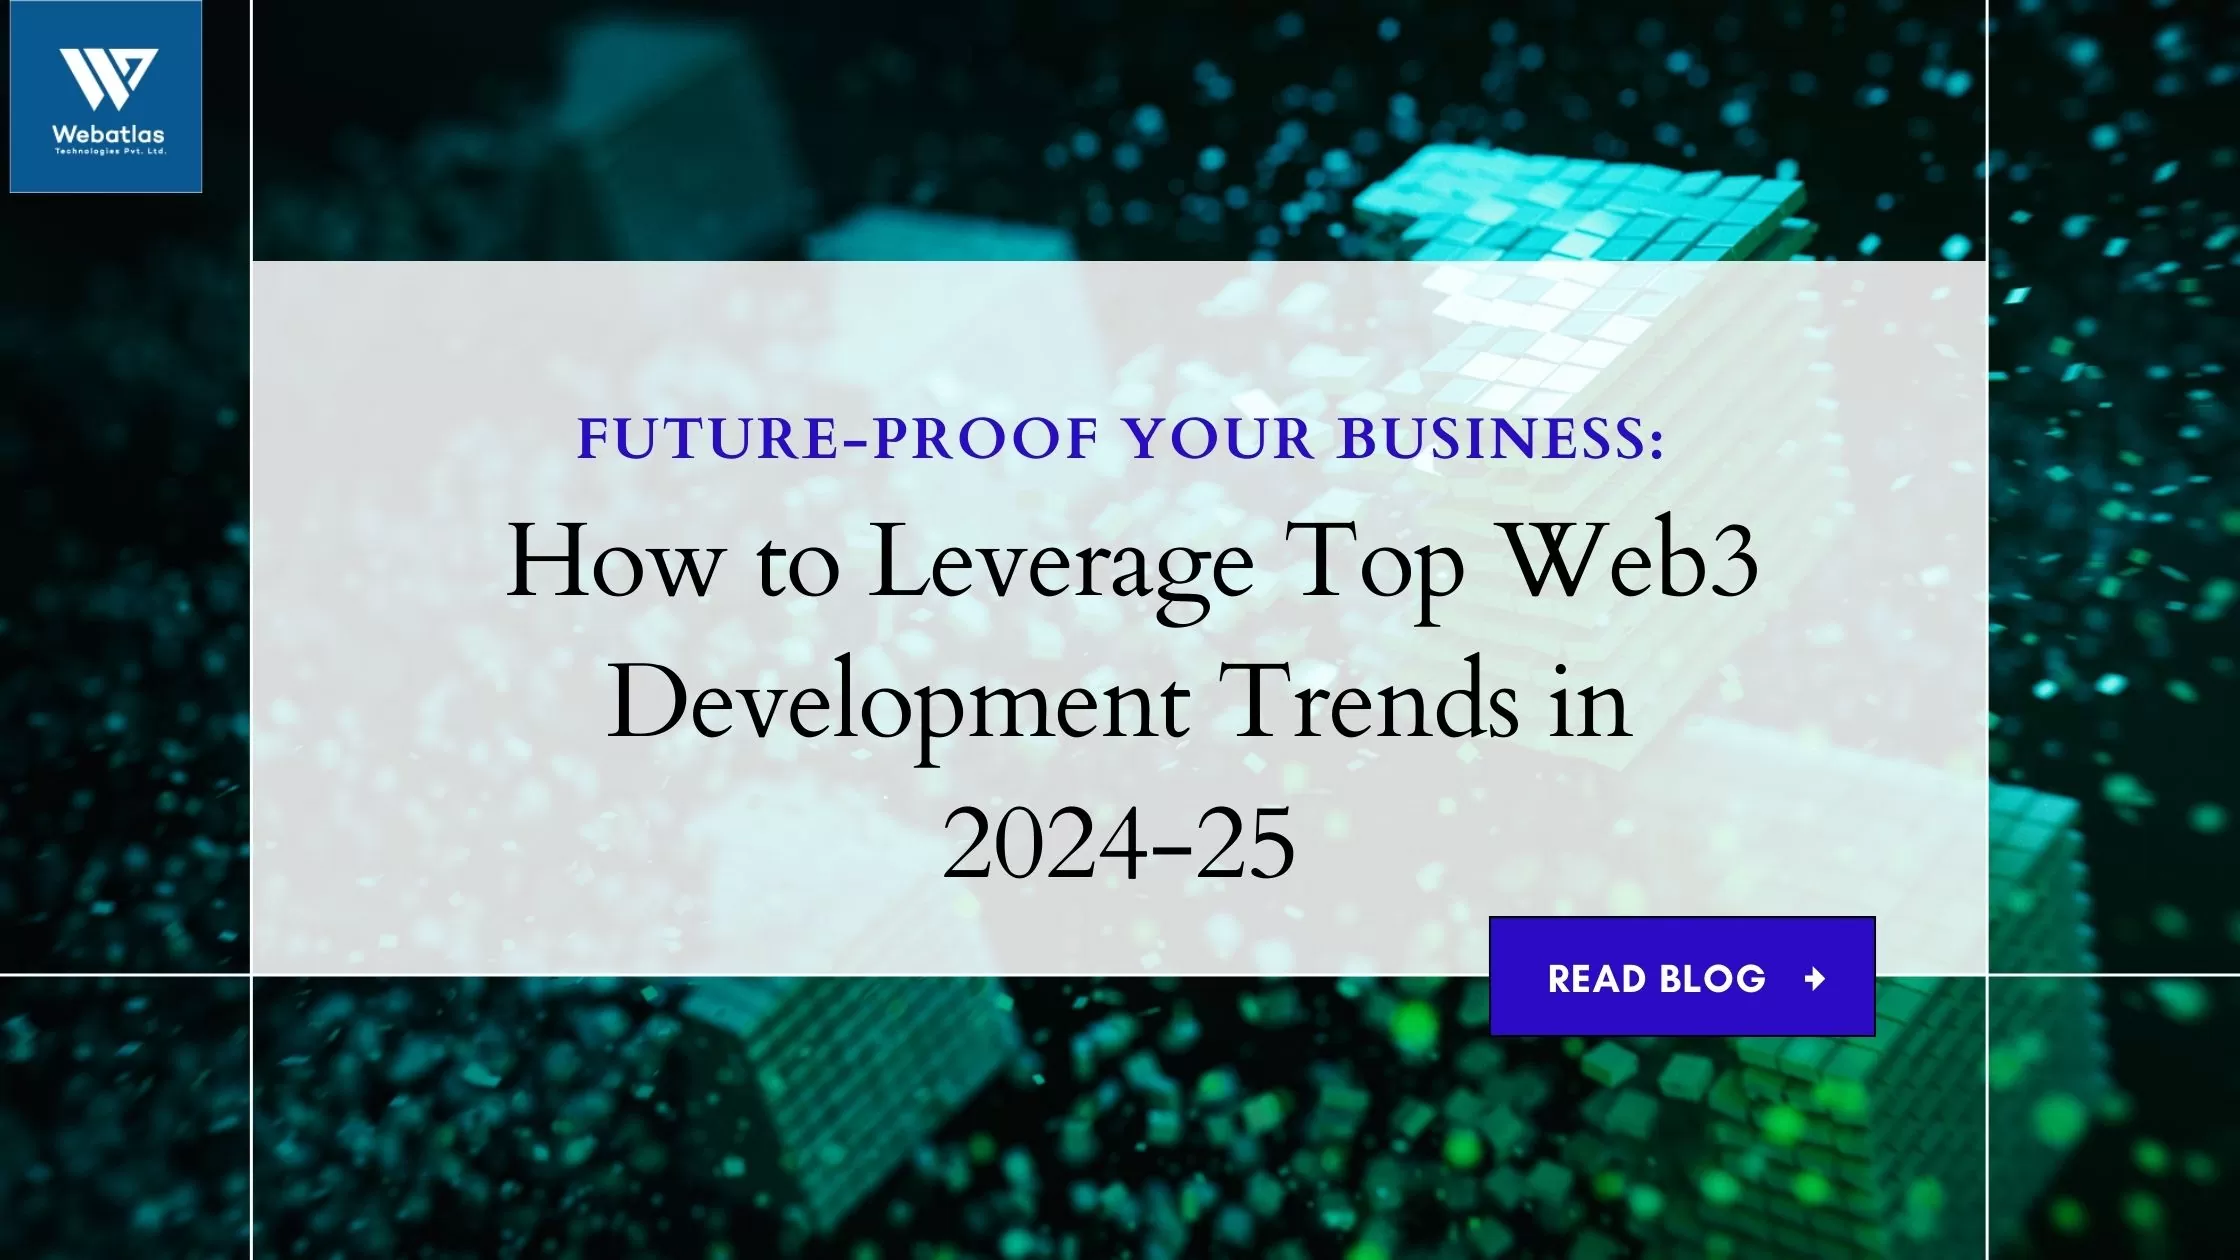 The Top Web3 Development Trends to Watch in 2024-25